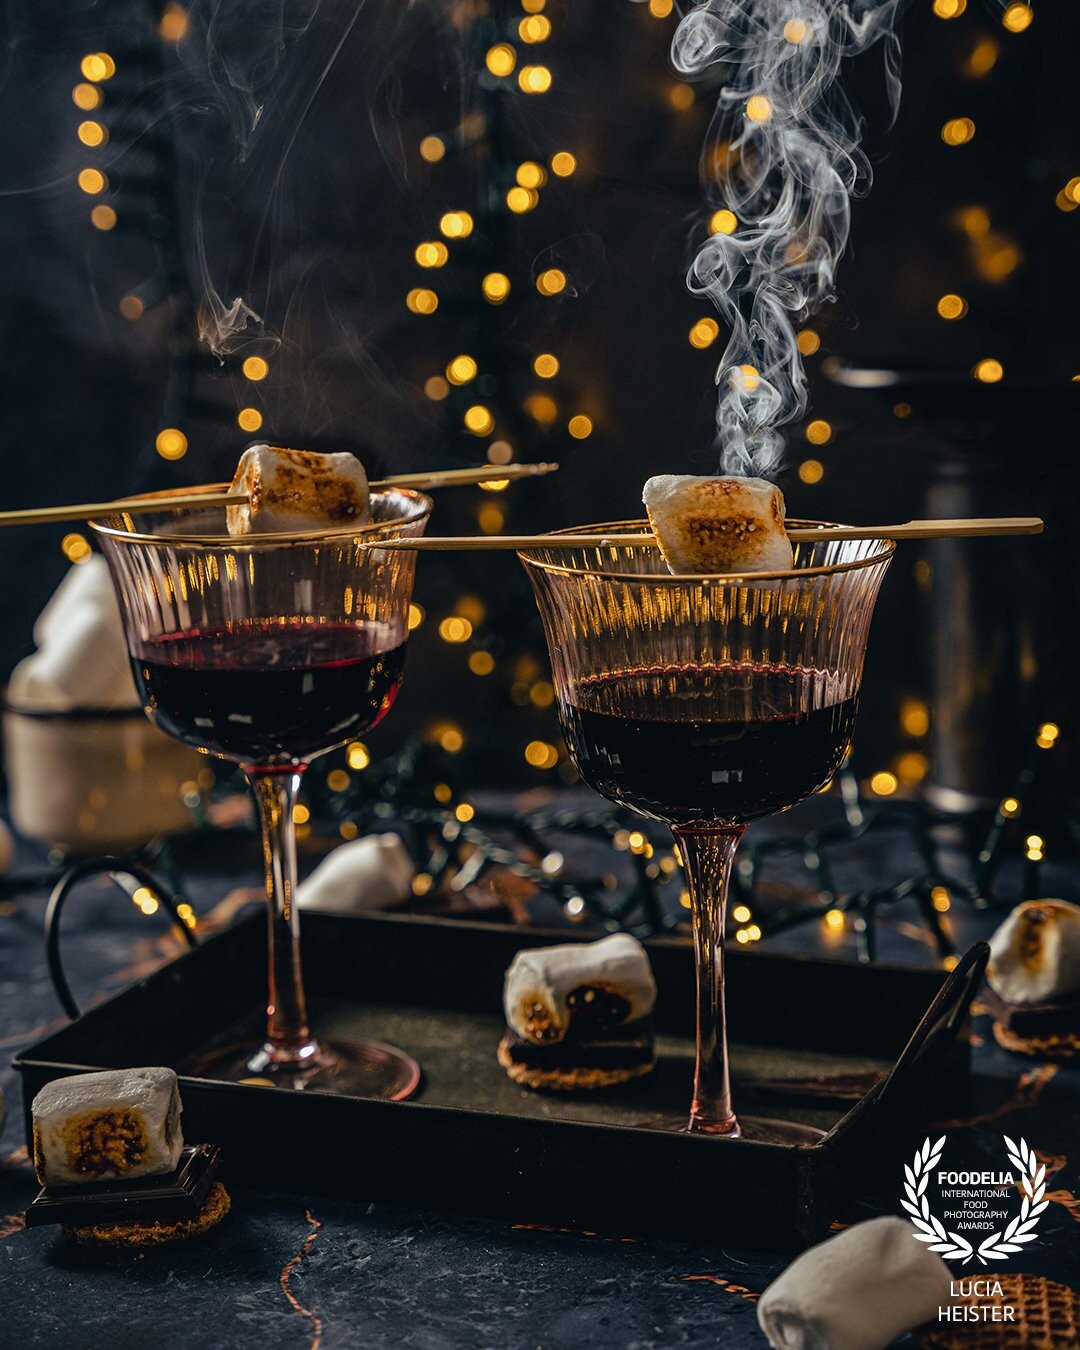 Cozy winter evenings with roasted marshmallows and red wine. <br />
Dark and moody photography was always really scary for me . But practise makes it better and better and that makes me really happy.